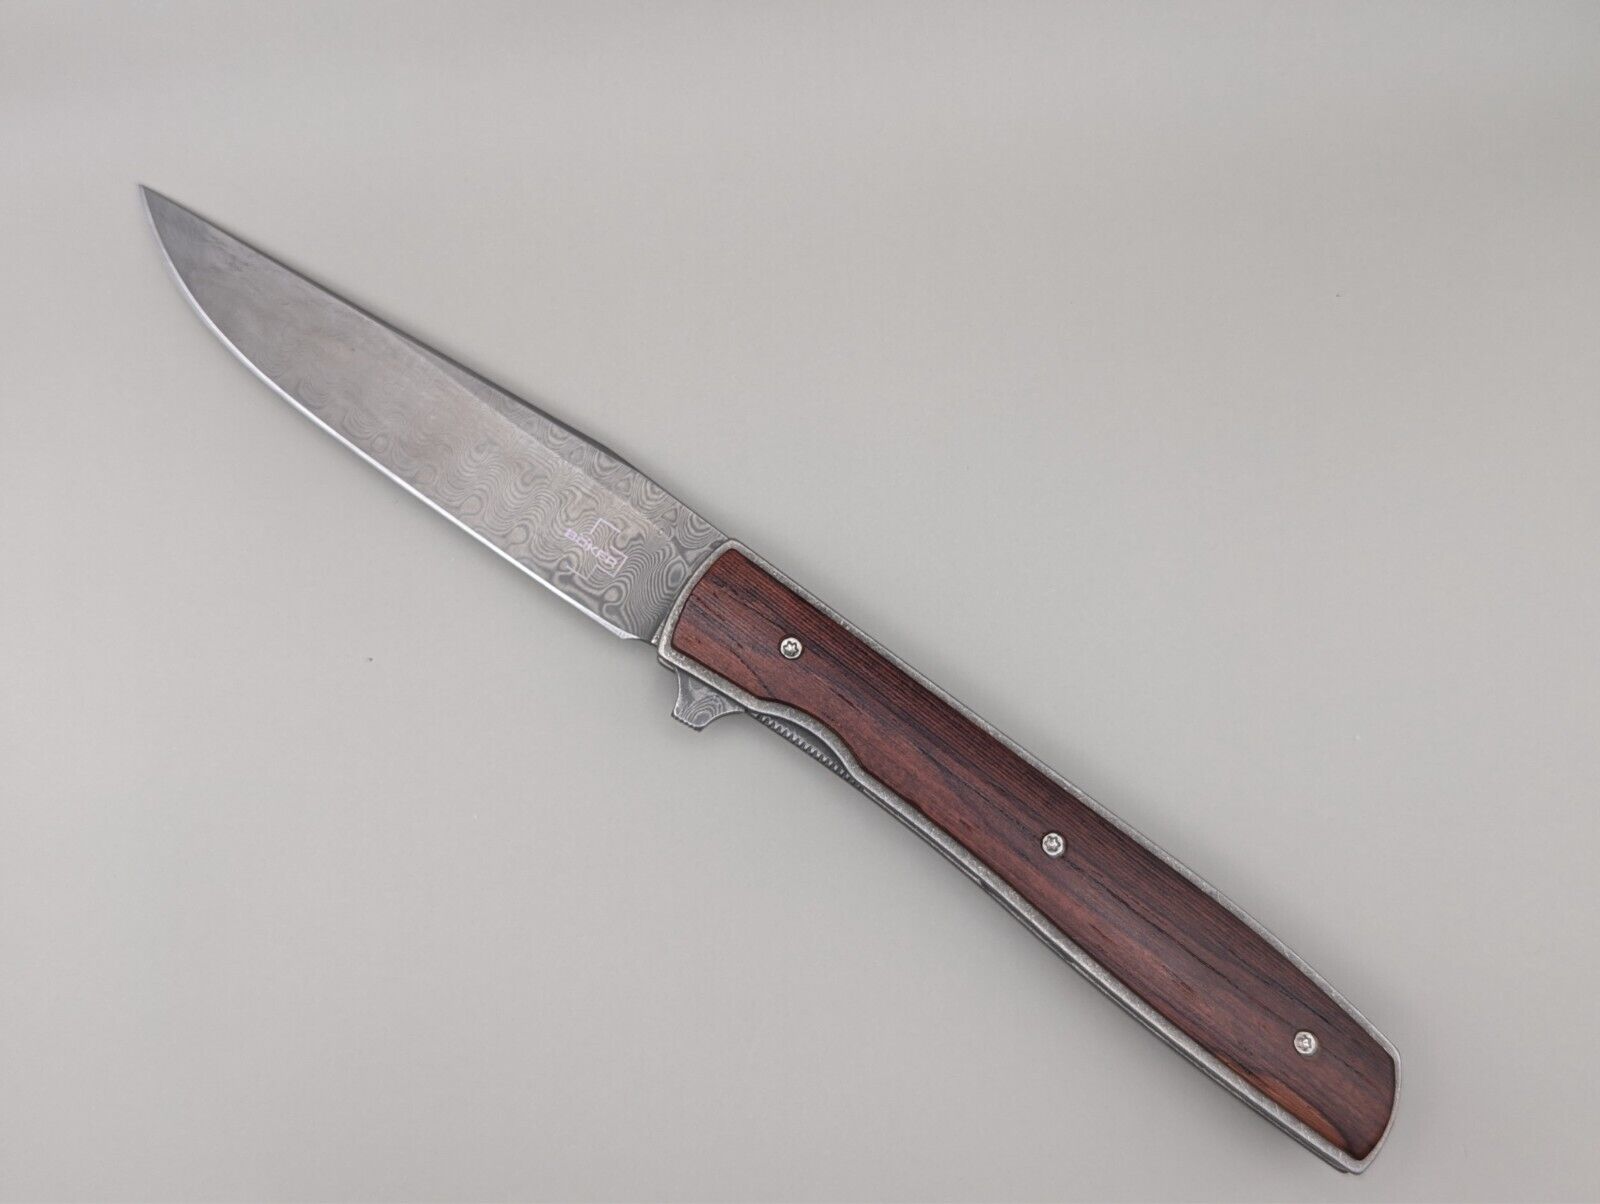 Plus Urban Trapper by Brad Zinker - Damascus Blade, Cocobolo Wood Handle